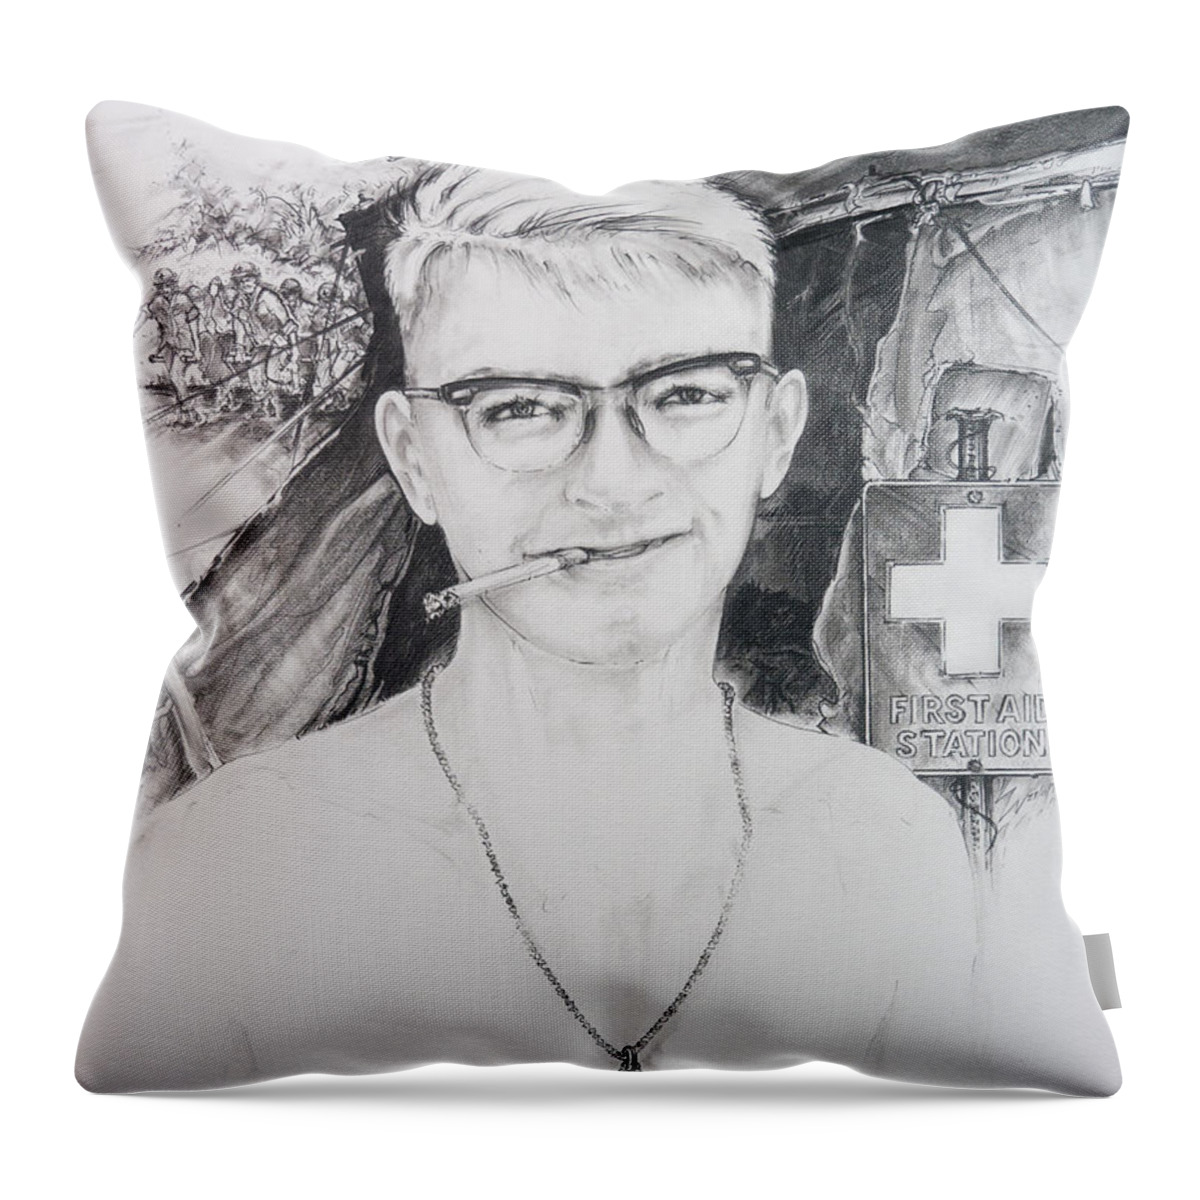 Vietnam Medic Throw Pillow featuring the drawing Vietnam Medic by Scott and Dixie Wiley